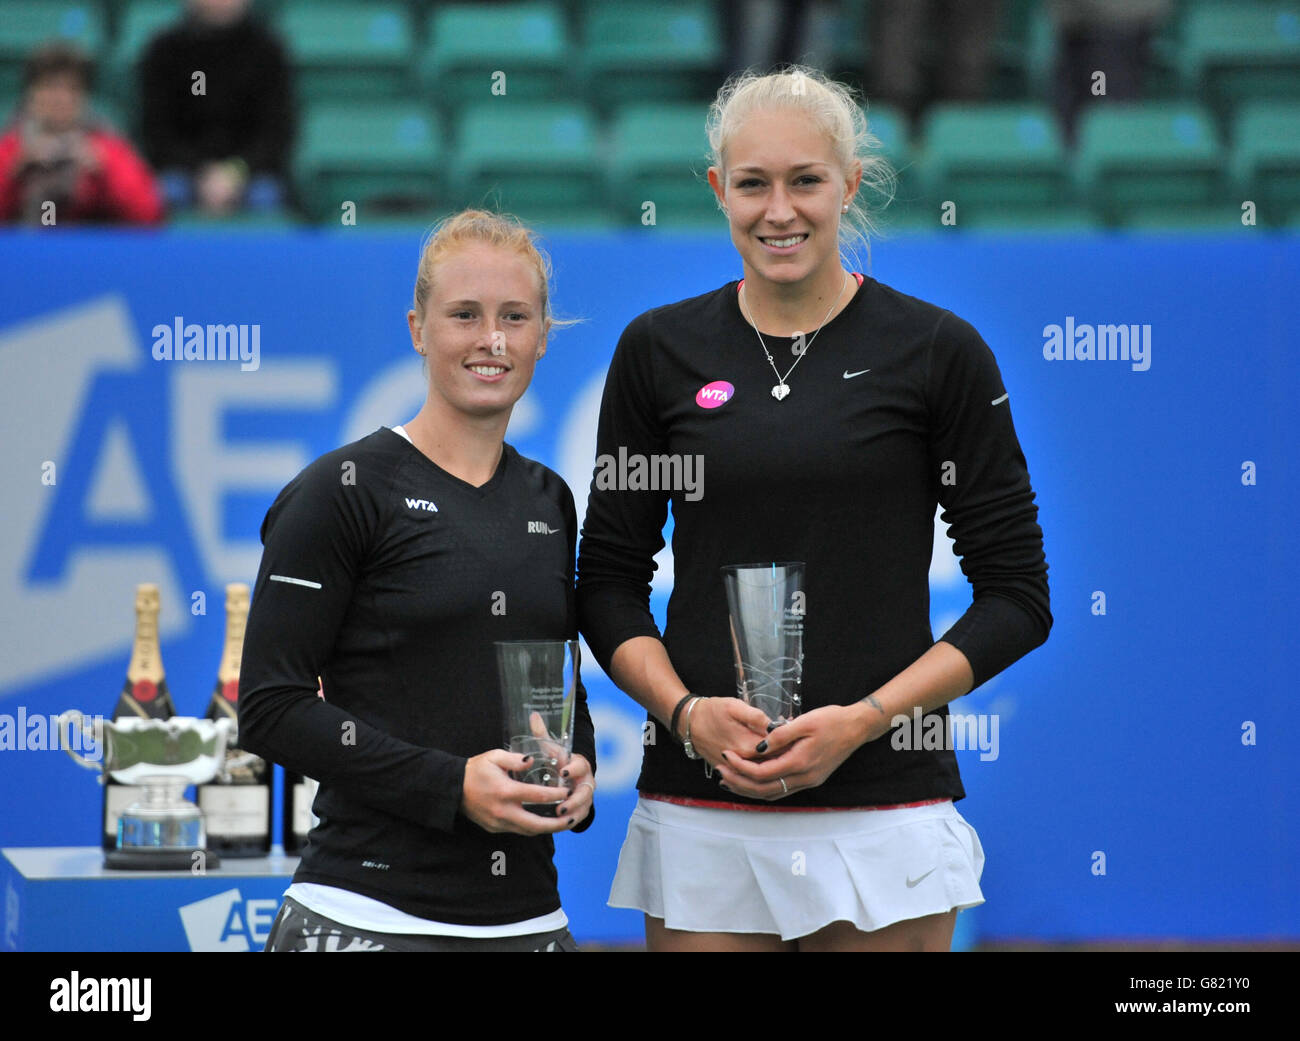 England's Anna Smith (left) and Jocelyn Rae after placing second in the Womens Doubles during Day Seven of the 2015 Aegon Open Nottingham Stock Photo